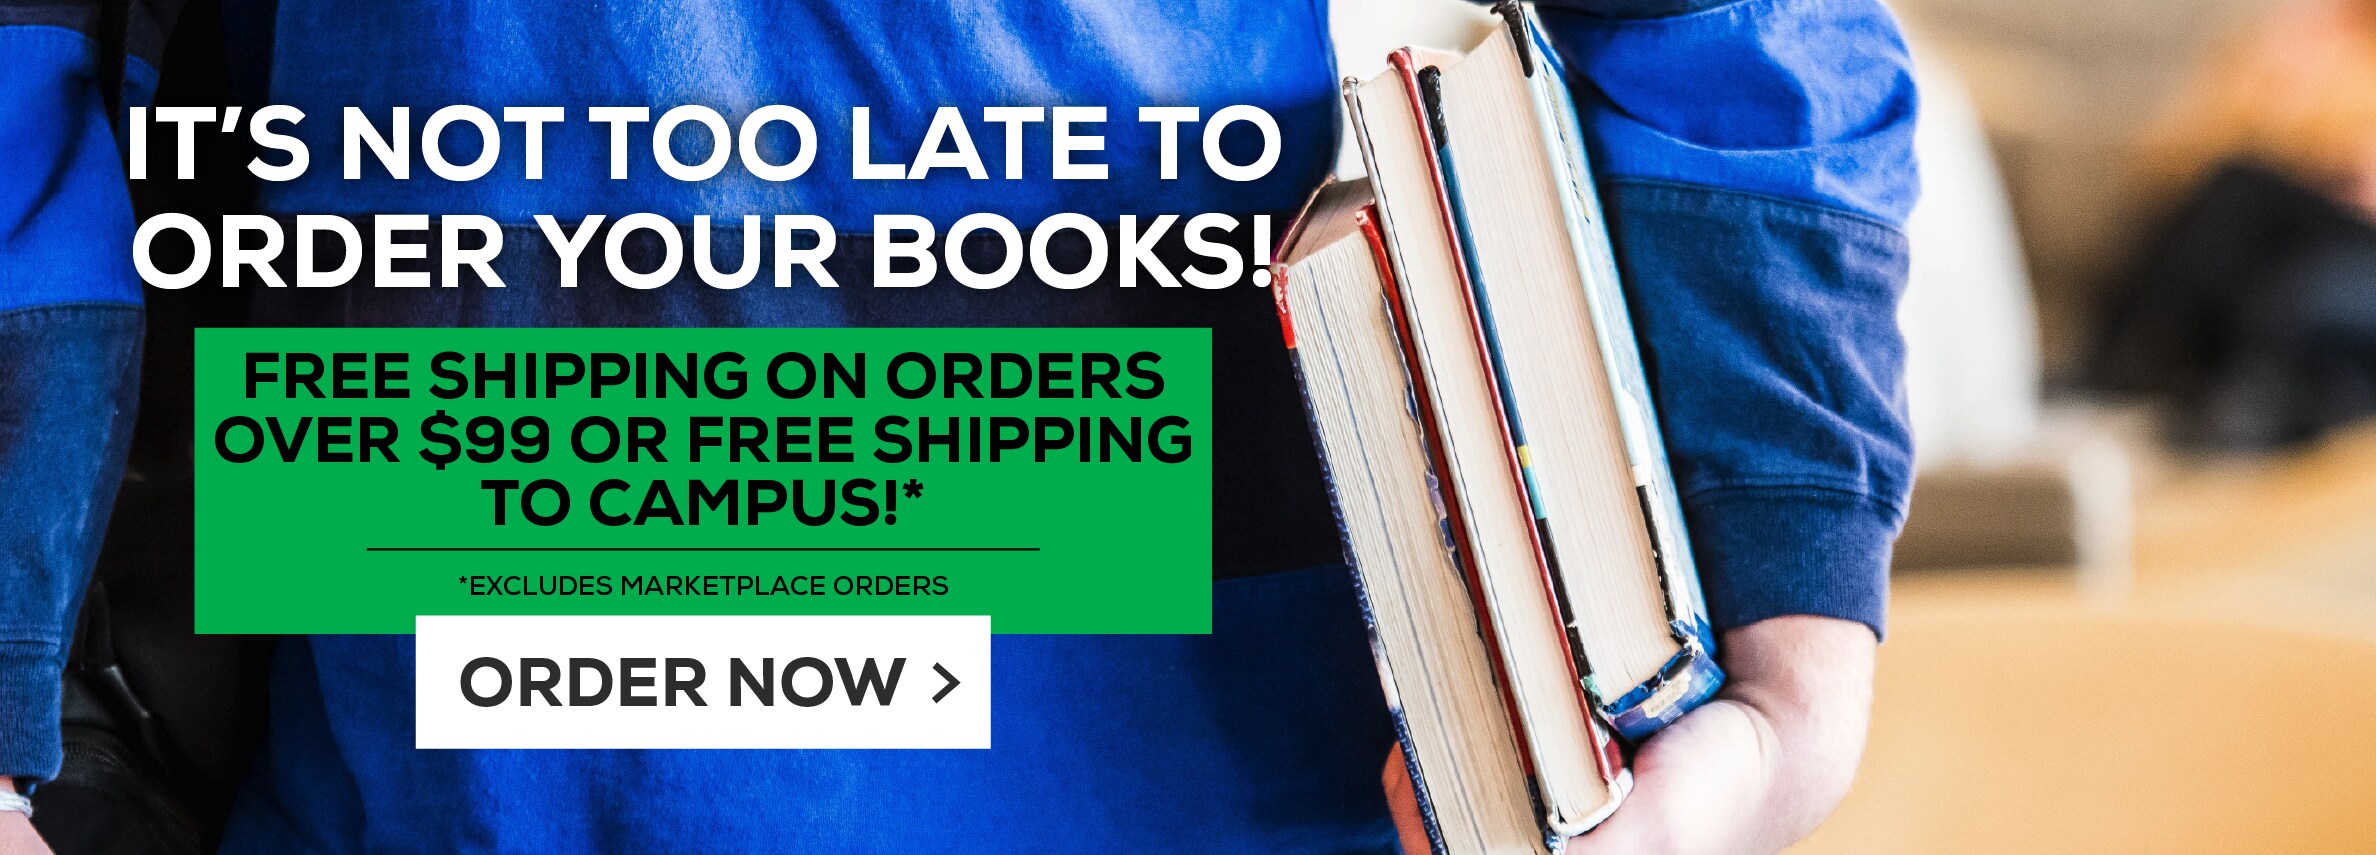 It's not too late to order your books!  Free shipping on orders over $99!* Excludes marketplace purchases. Order Now.